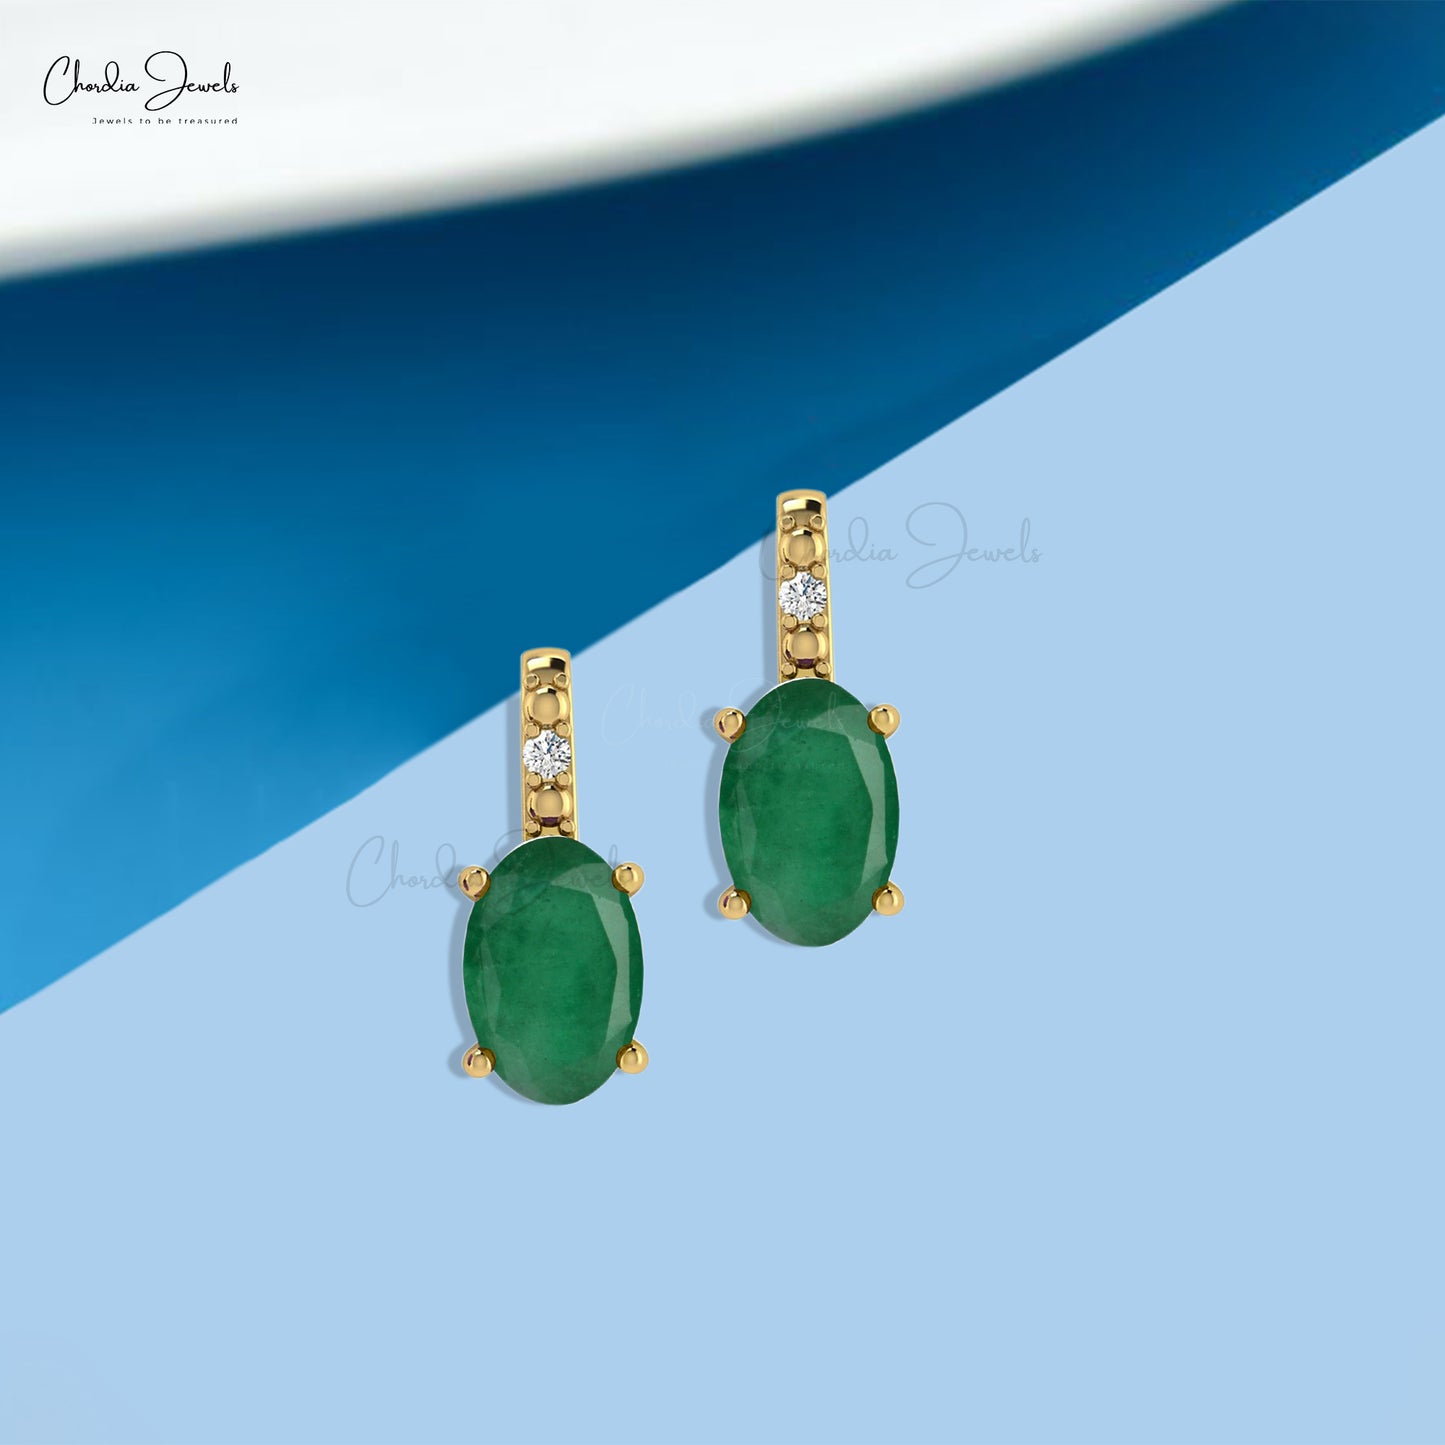 Adorn yourself with our emerald and diamond earrings